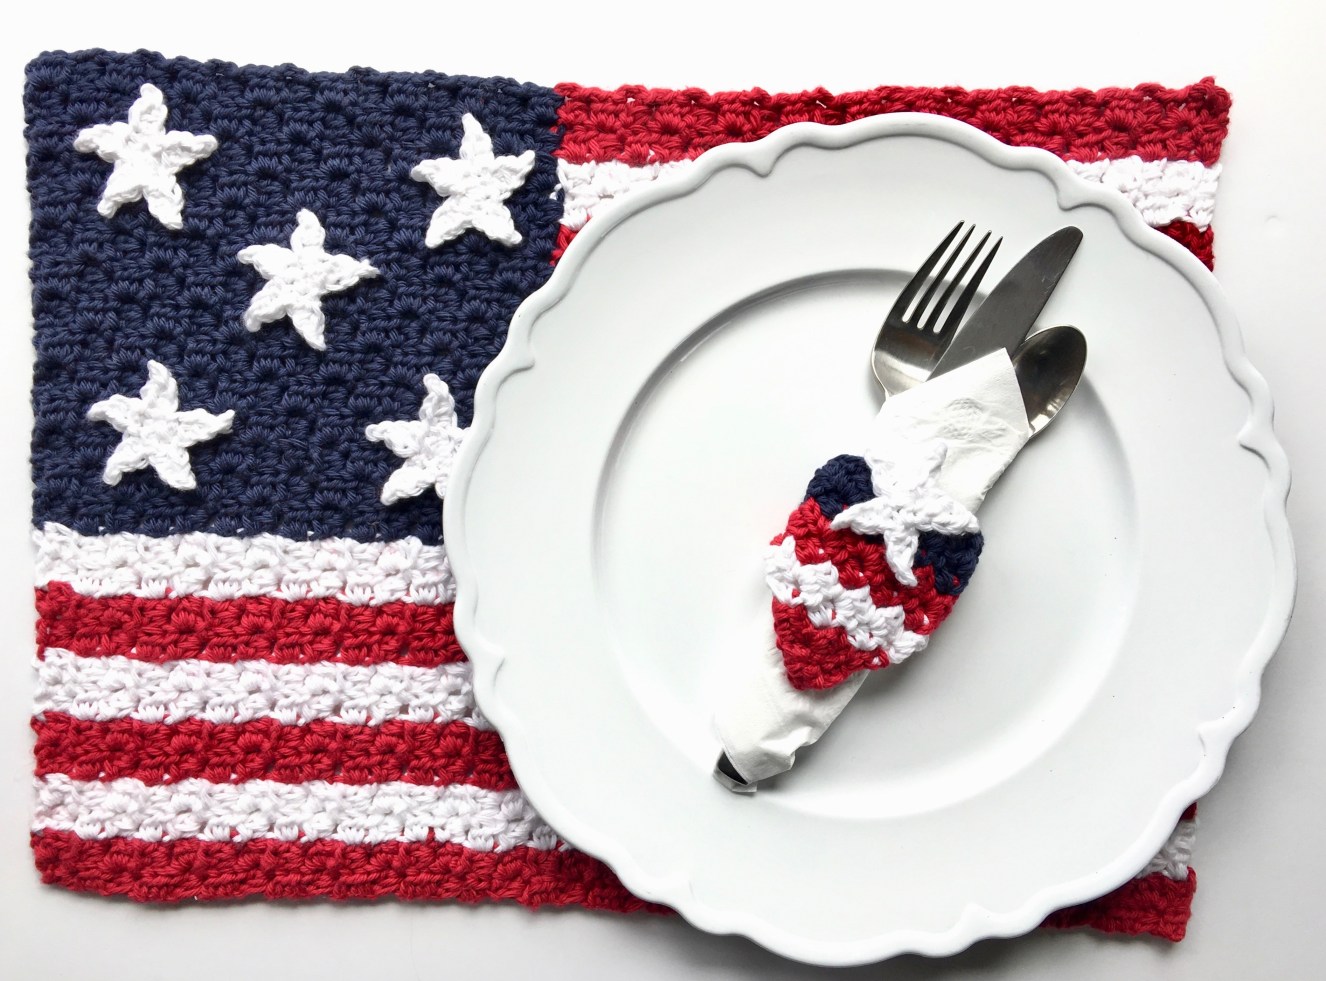 American Flag Placemat & Napkin Ring Free Crochet Pattern.